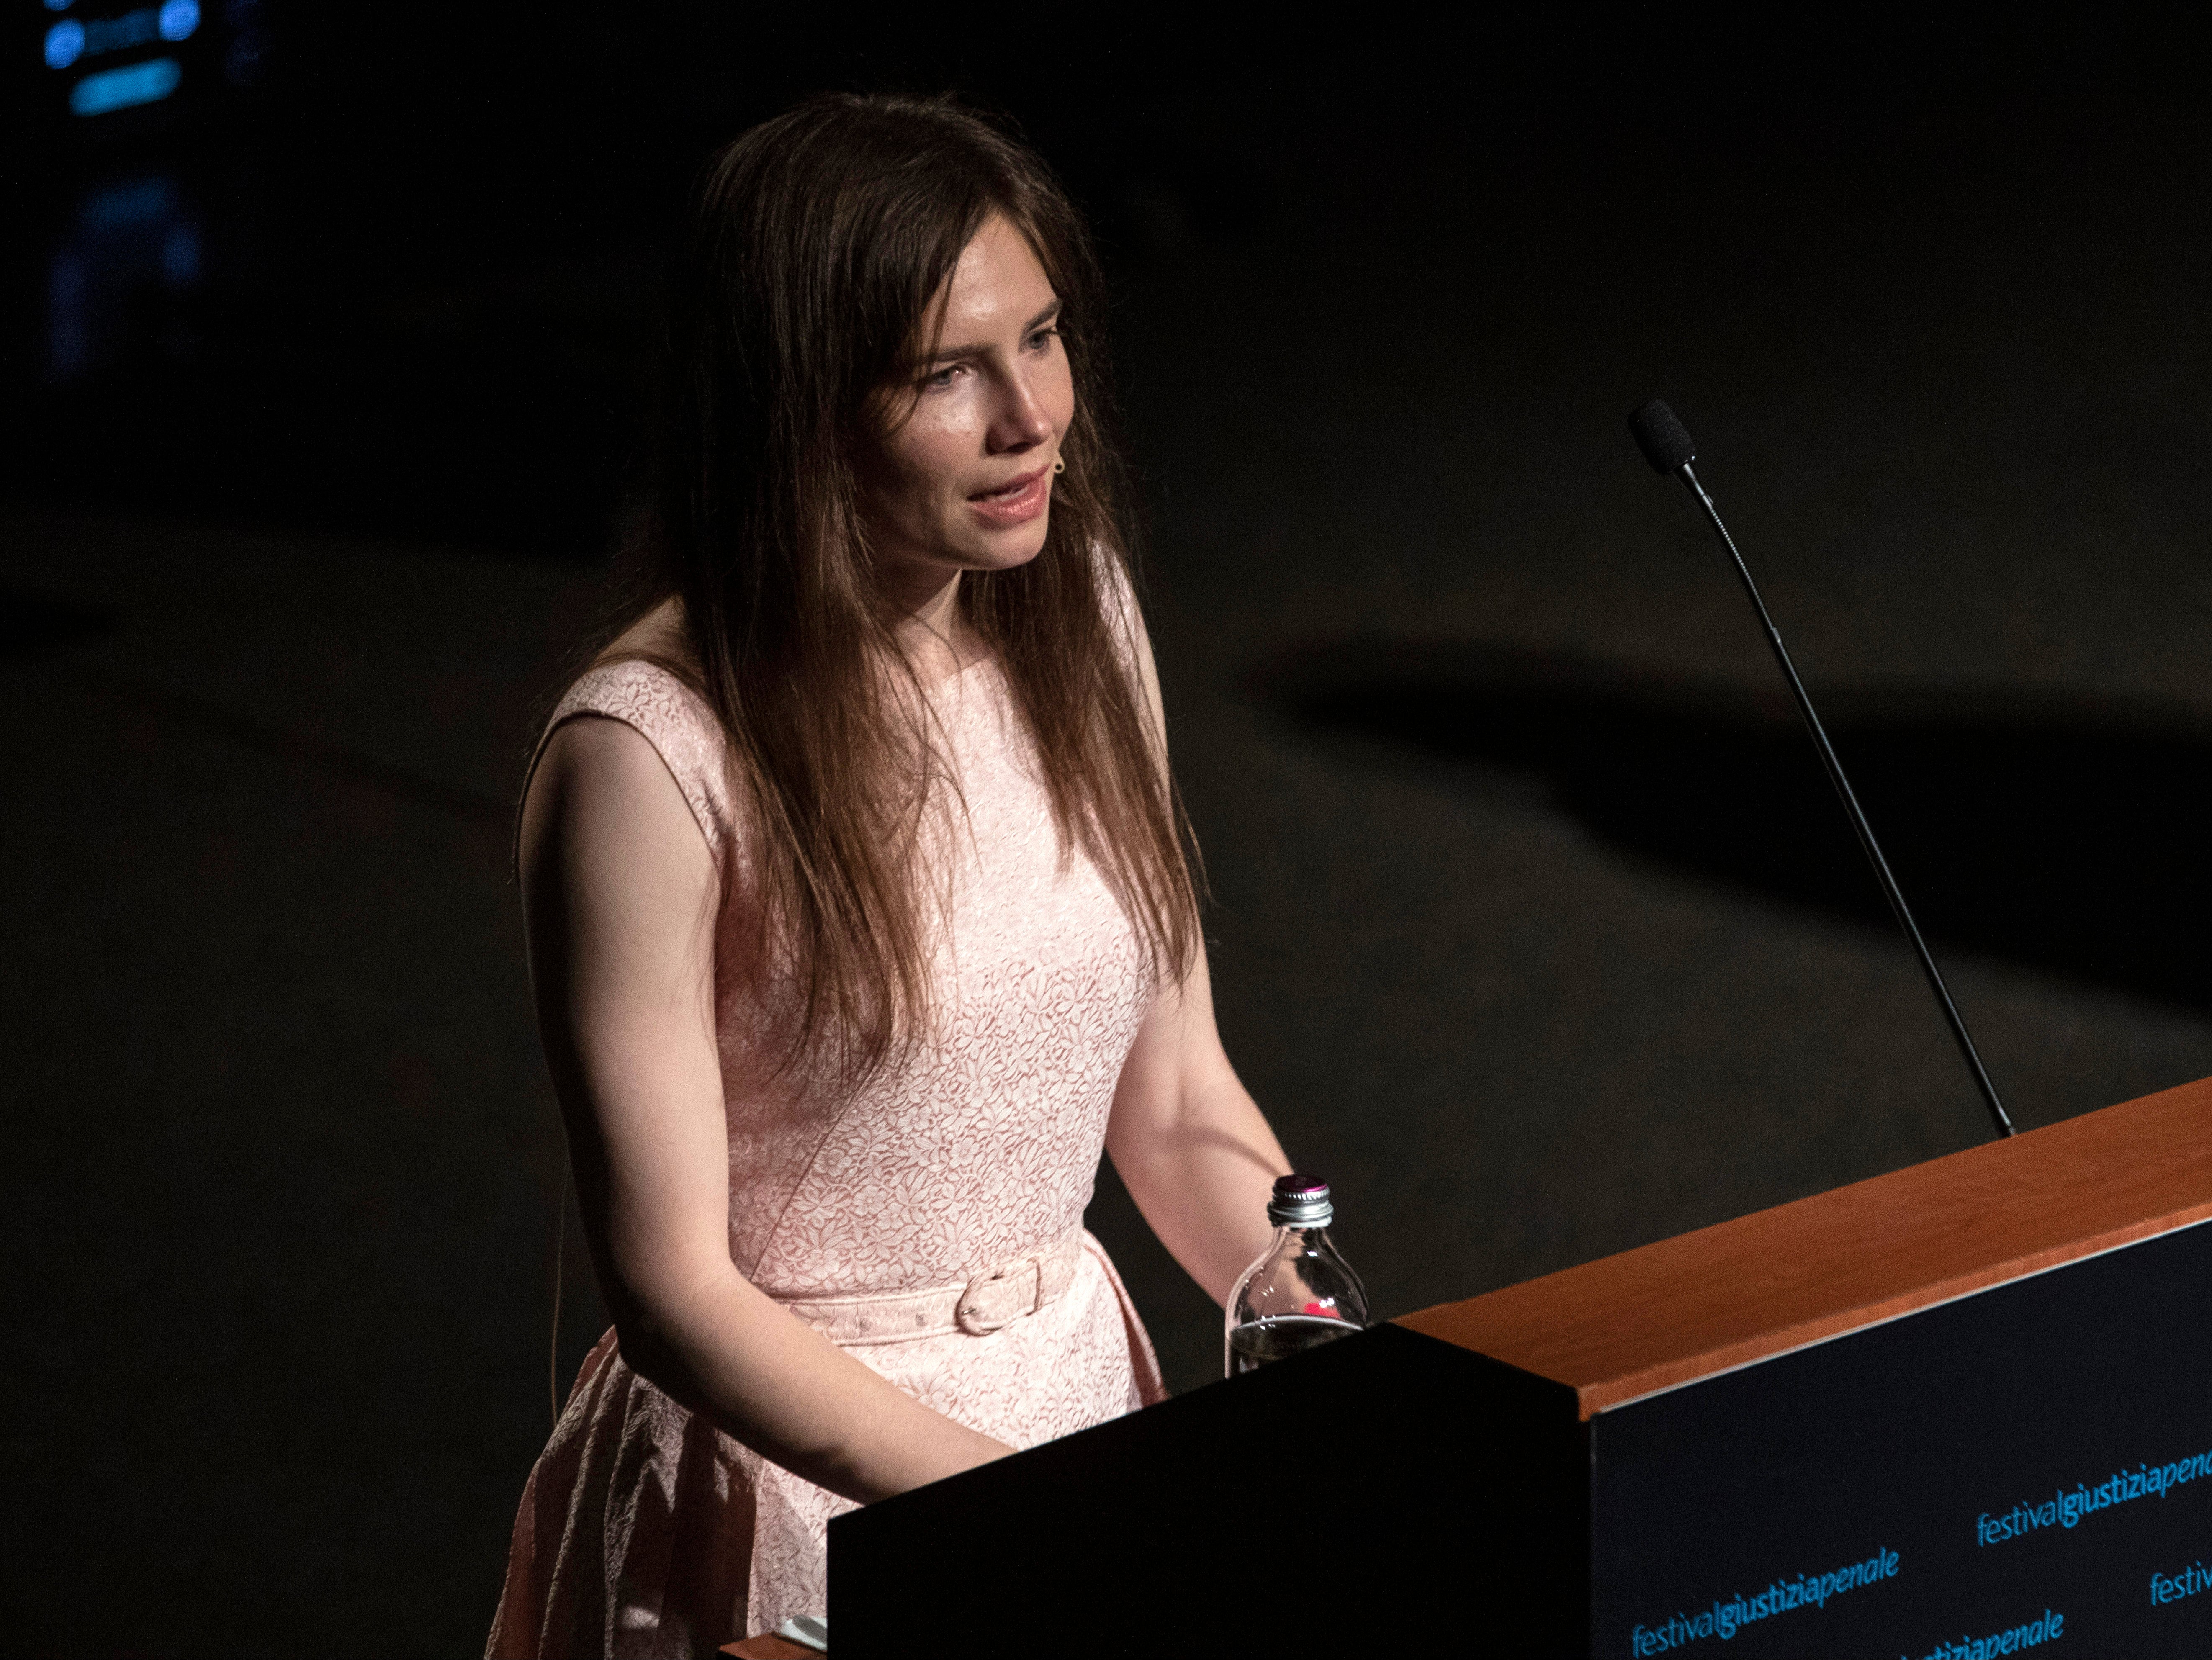 Amanda Knox delivers a speech during the Criminal Justice Festival, an event organised by The Italy Innocence Project and the local association of barristers, on 15 June 2019 in Modena